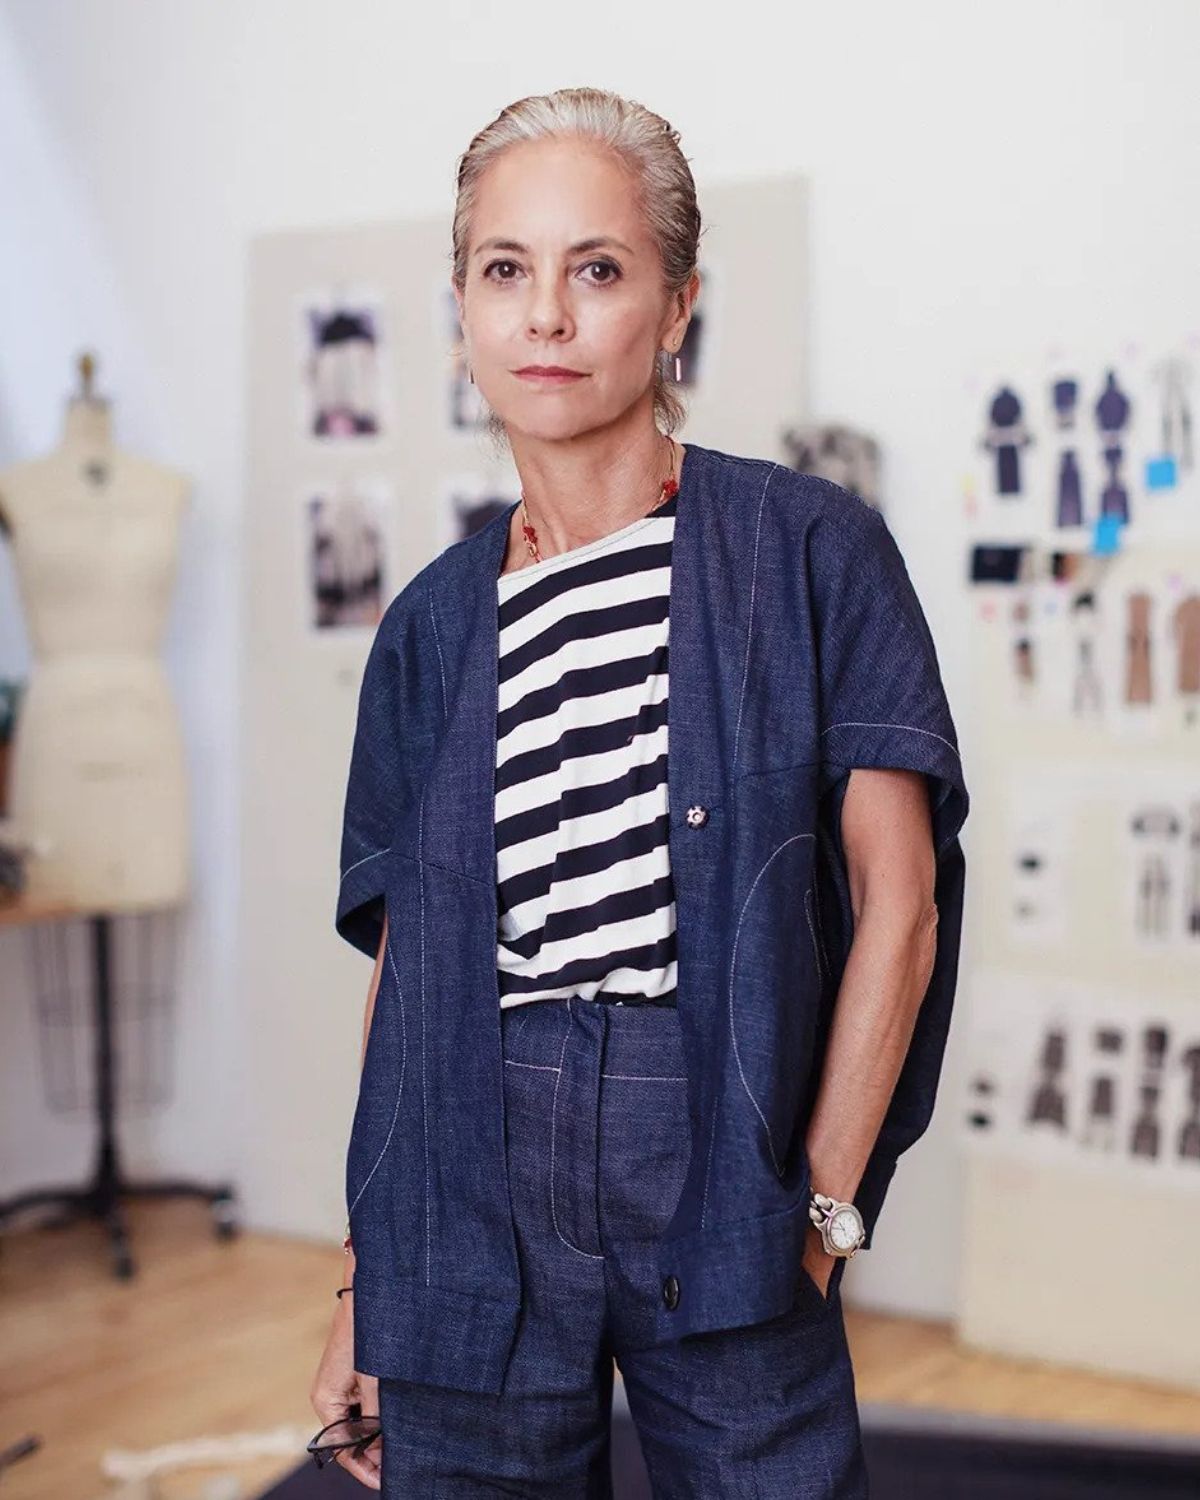 Designer Maria Cornejo wearing a matching navy blue pants and jacket with a striped t-shirt underneath.